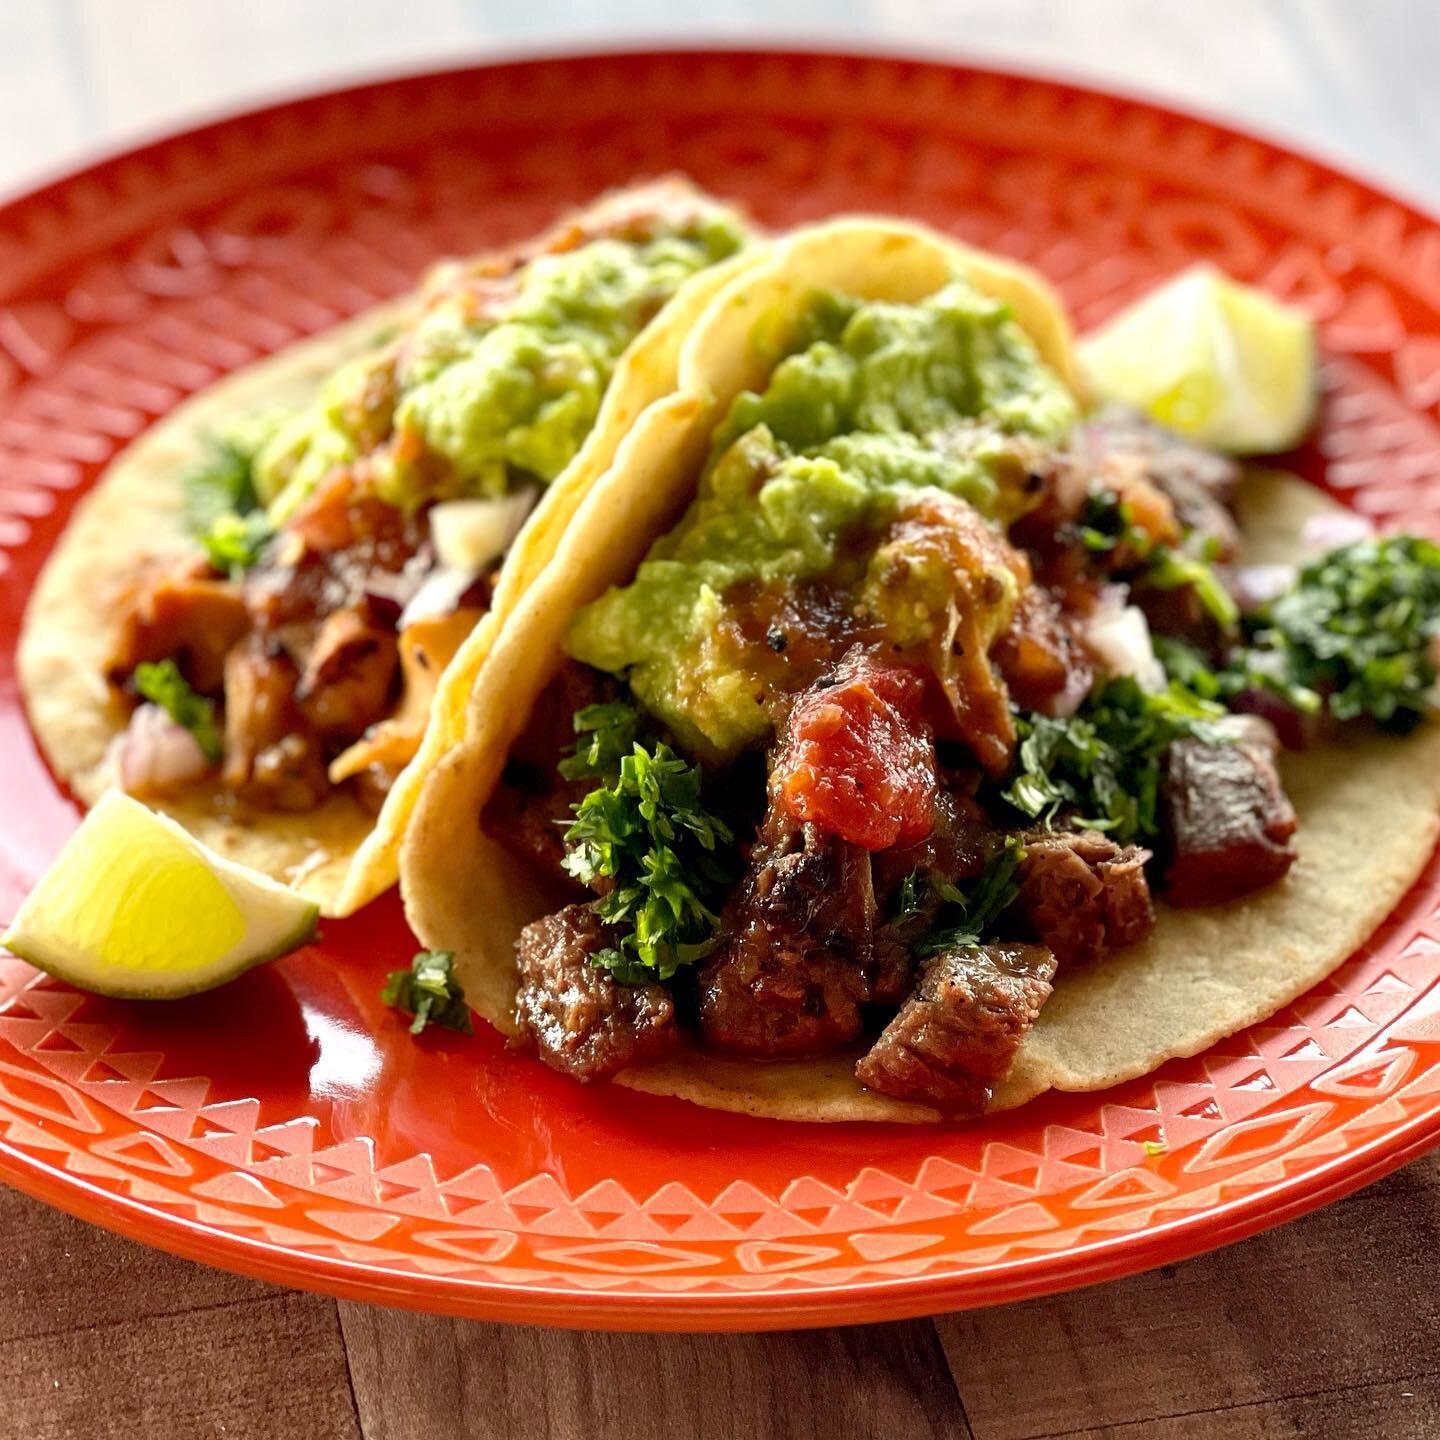 When you&rsquo;re plate looks like this, you know you&rsquo;re about to have a bomb day with these TJ style tacos! 🤤🌮 
#tacos #tijuana #tortilla #carne #pollo #cilantro #cebolla #lima #salsa